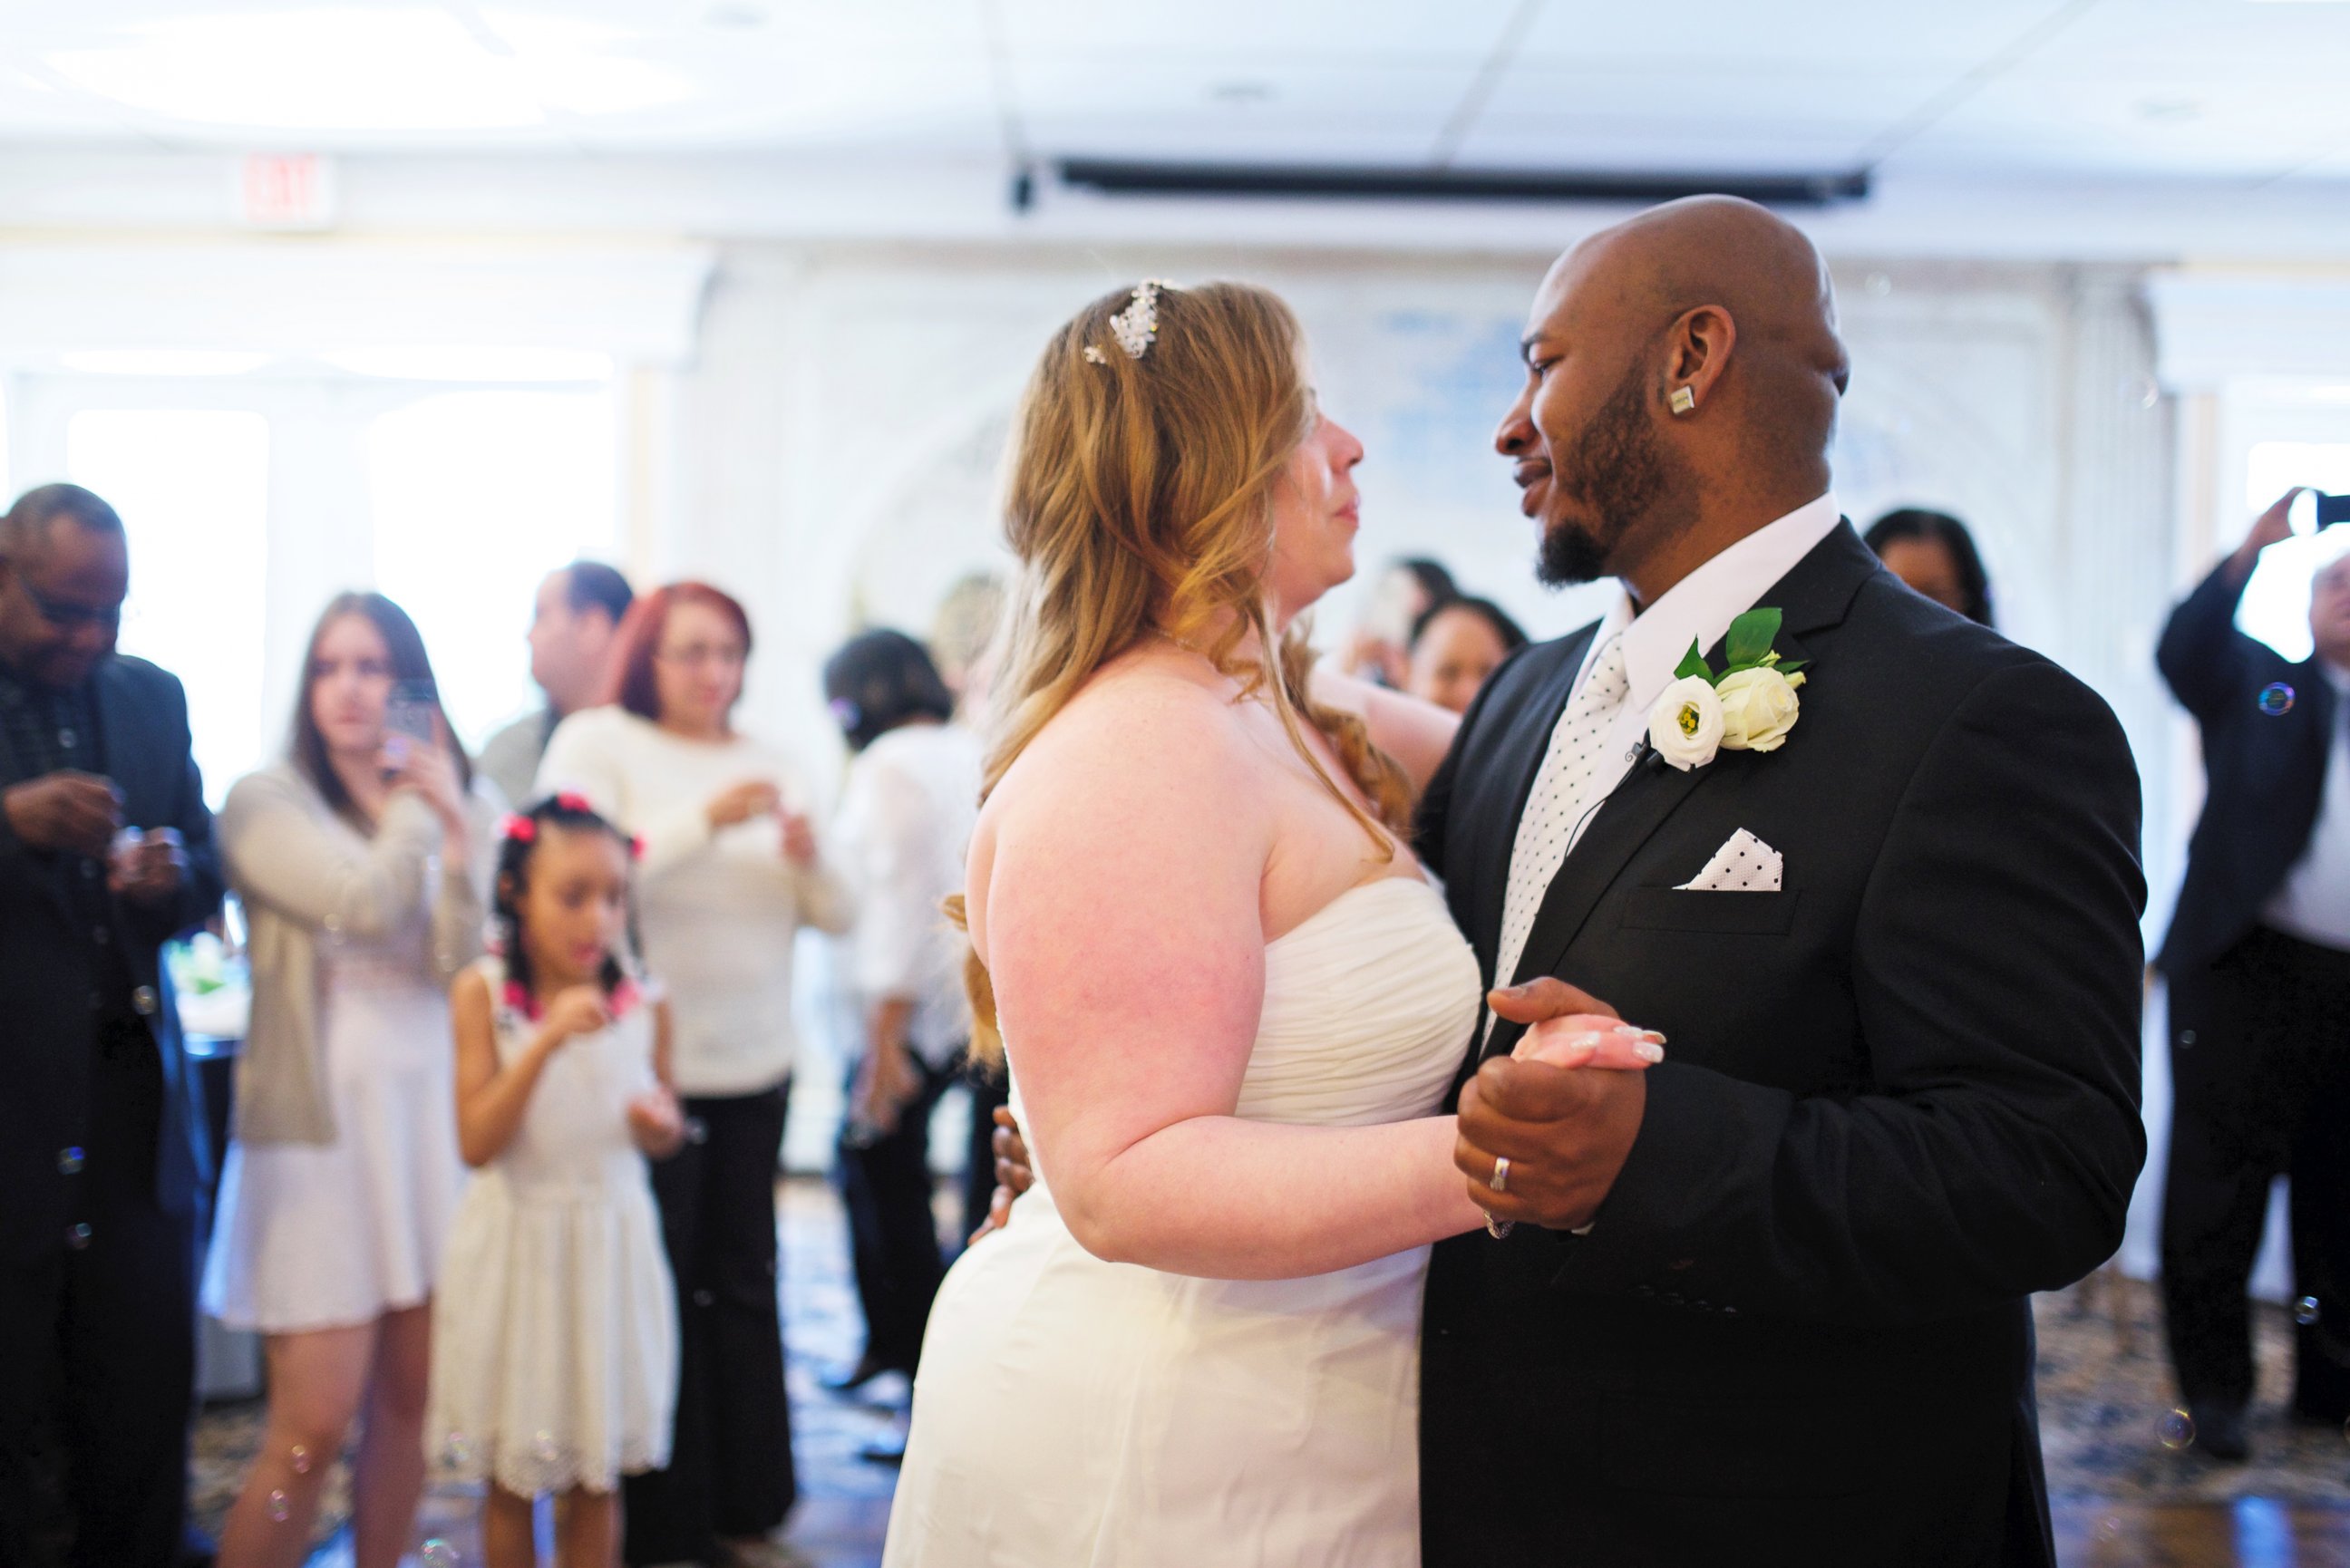 PHOTO: Abigail Lydick and her husband Andrew Lydick planned a free wedding for Erica Meyers and Darrell Meyers in less than two days after hearing that Erica's mother Alicia Reyes, who has cancer, had been told she didn't have much longer to live. 